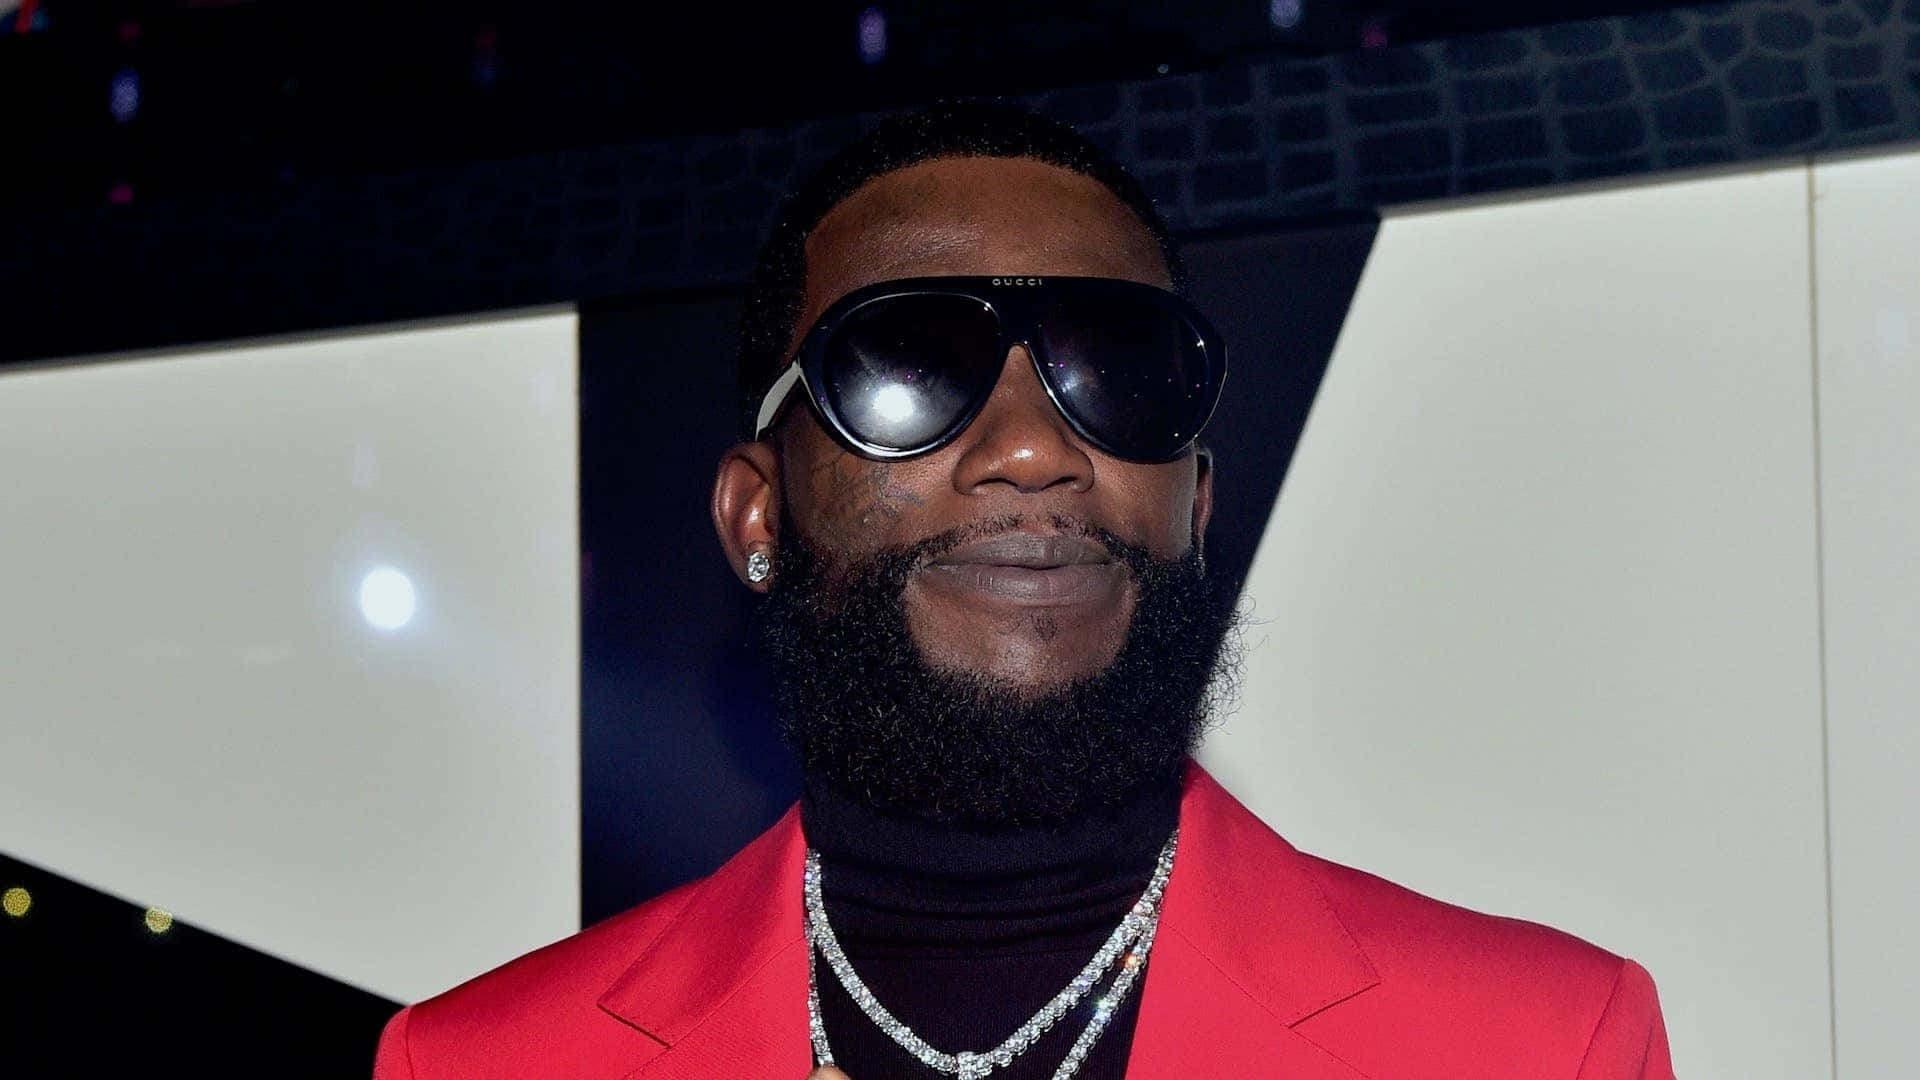 Gucci Mane Red Suit Event Background